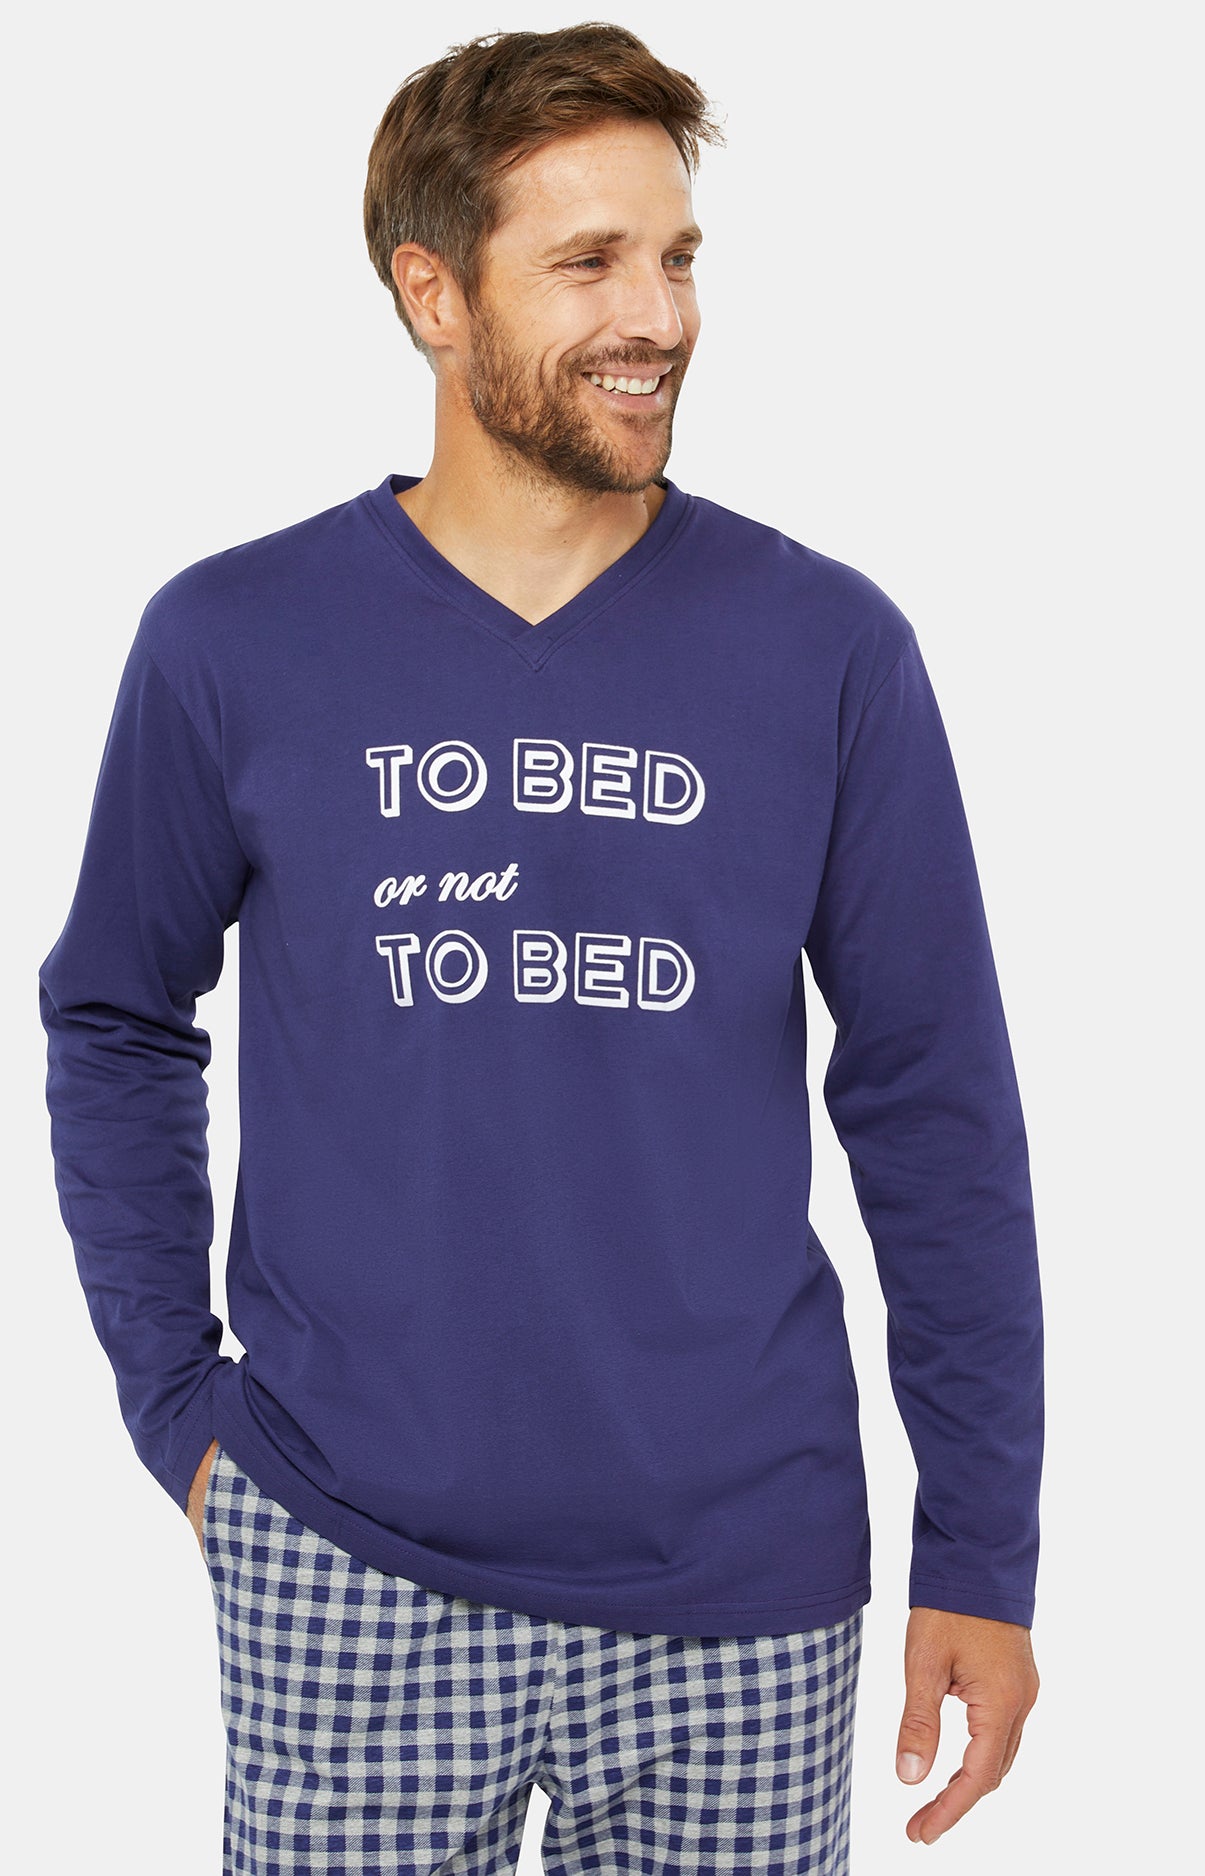 Pyjama - Bed or not to bed